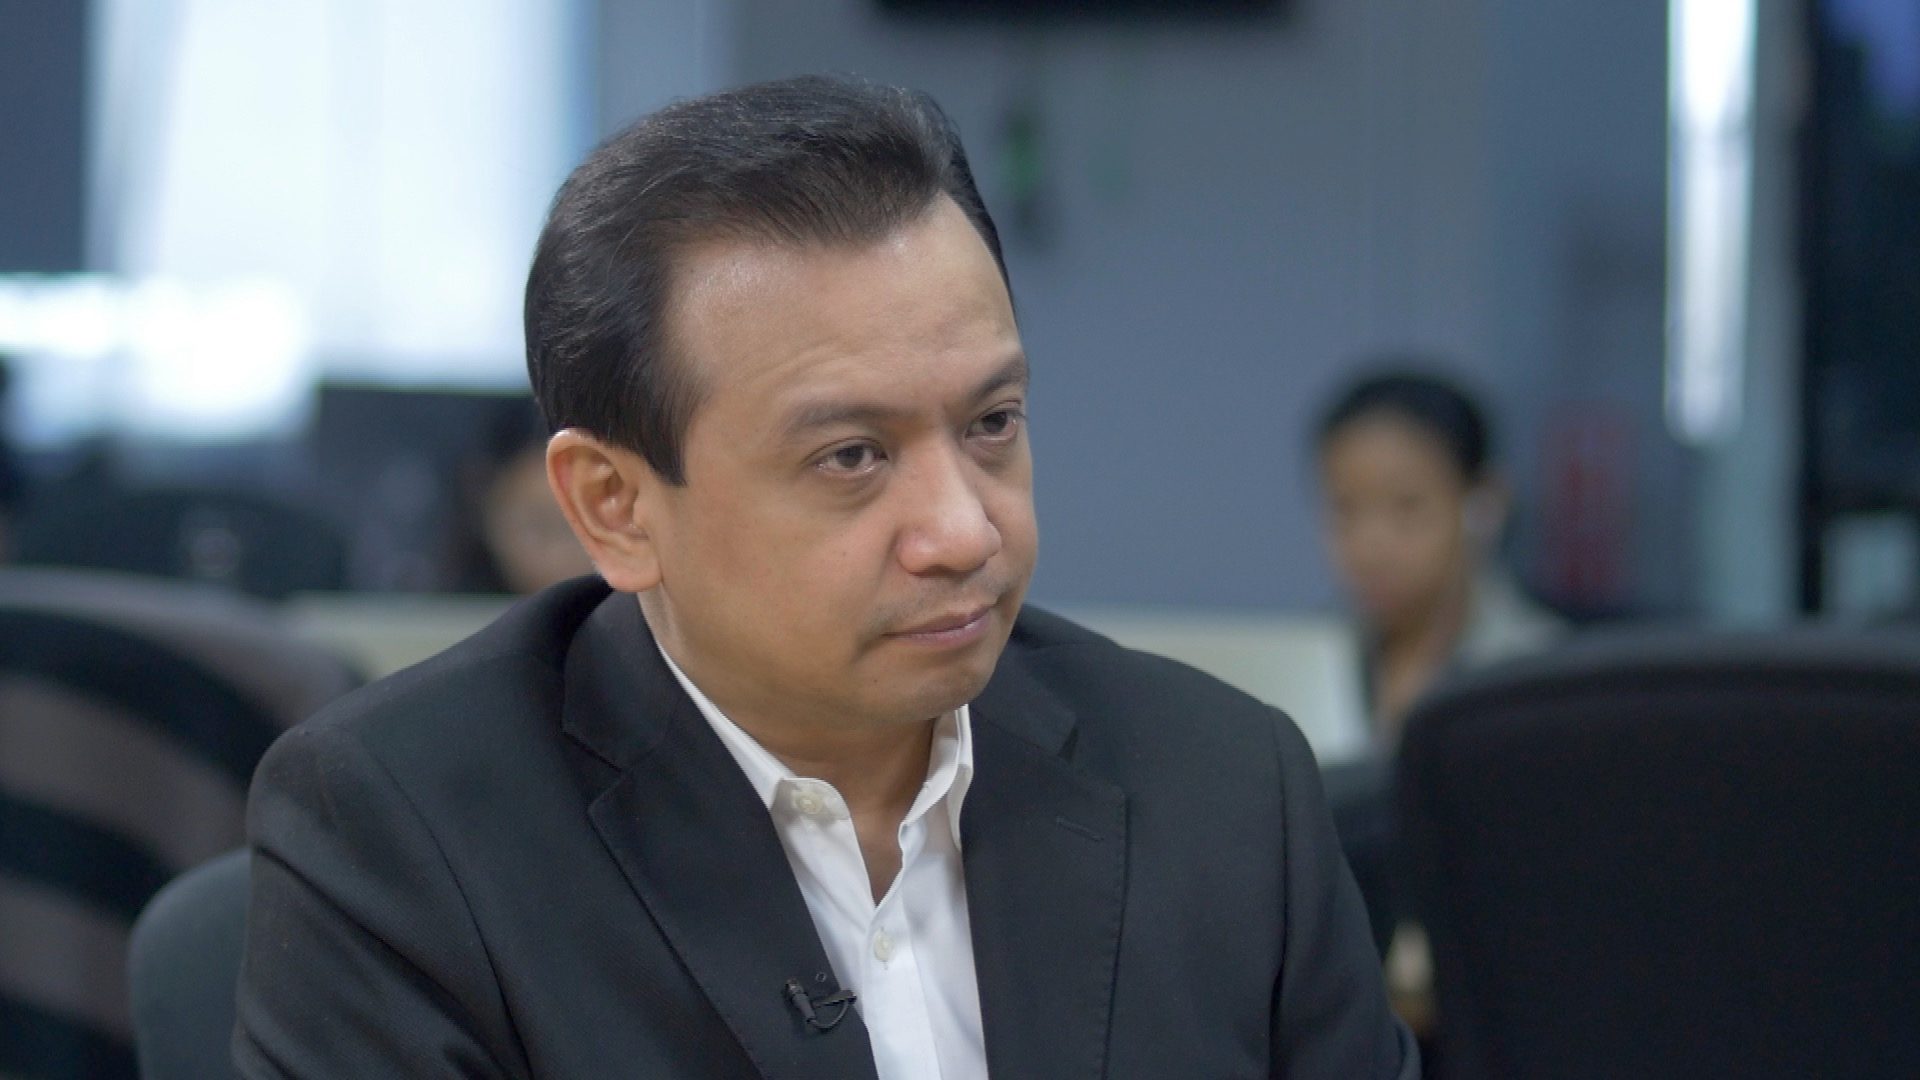 Trillanes turns down political asylum offers: Fight is here